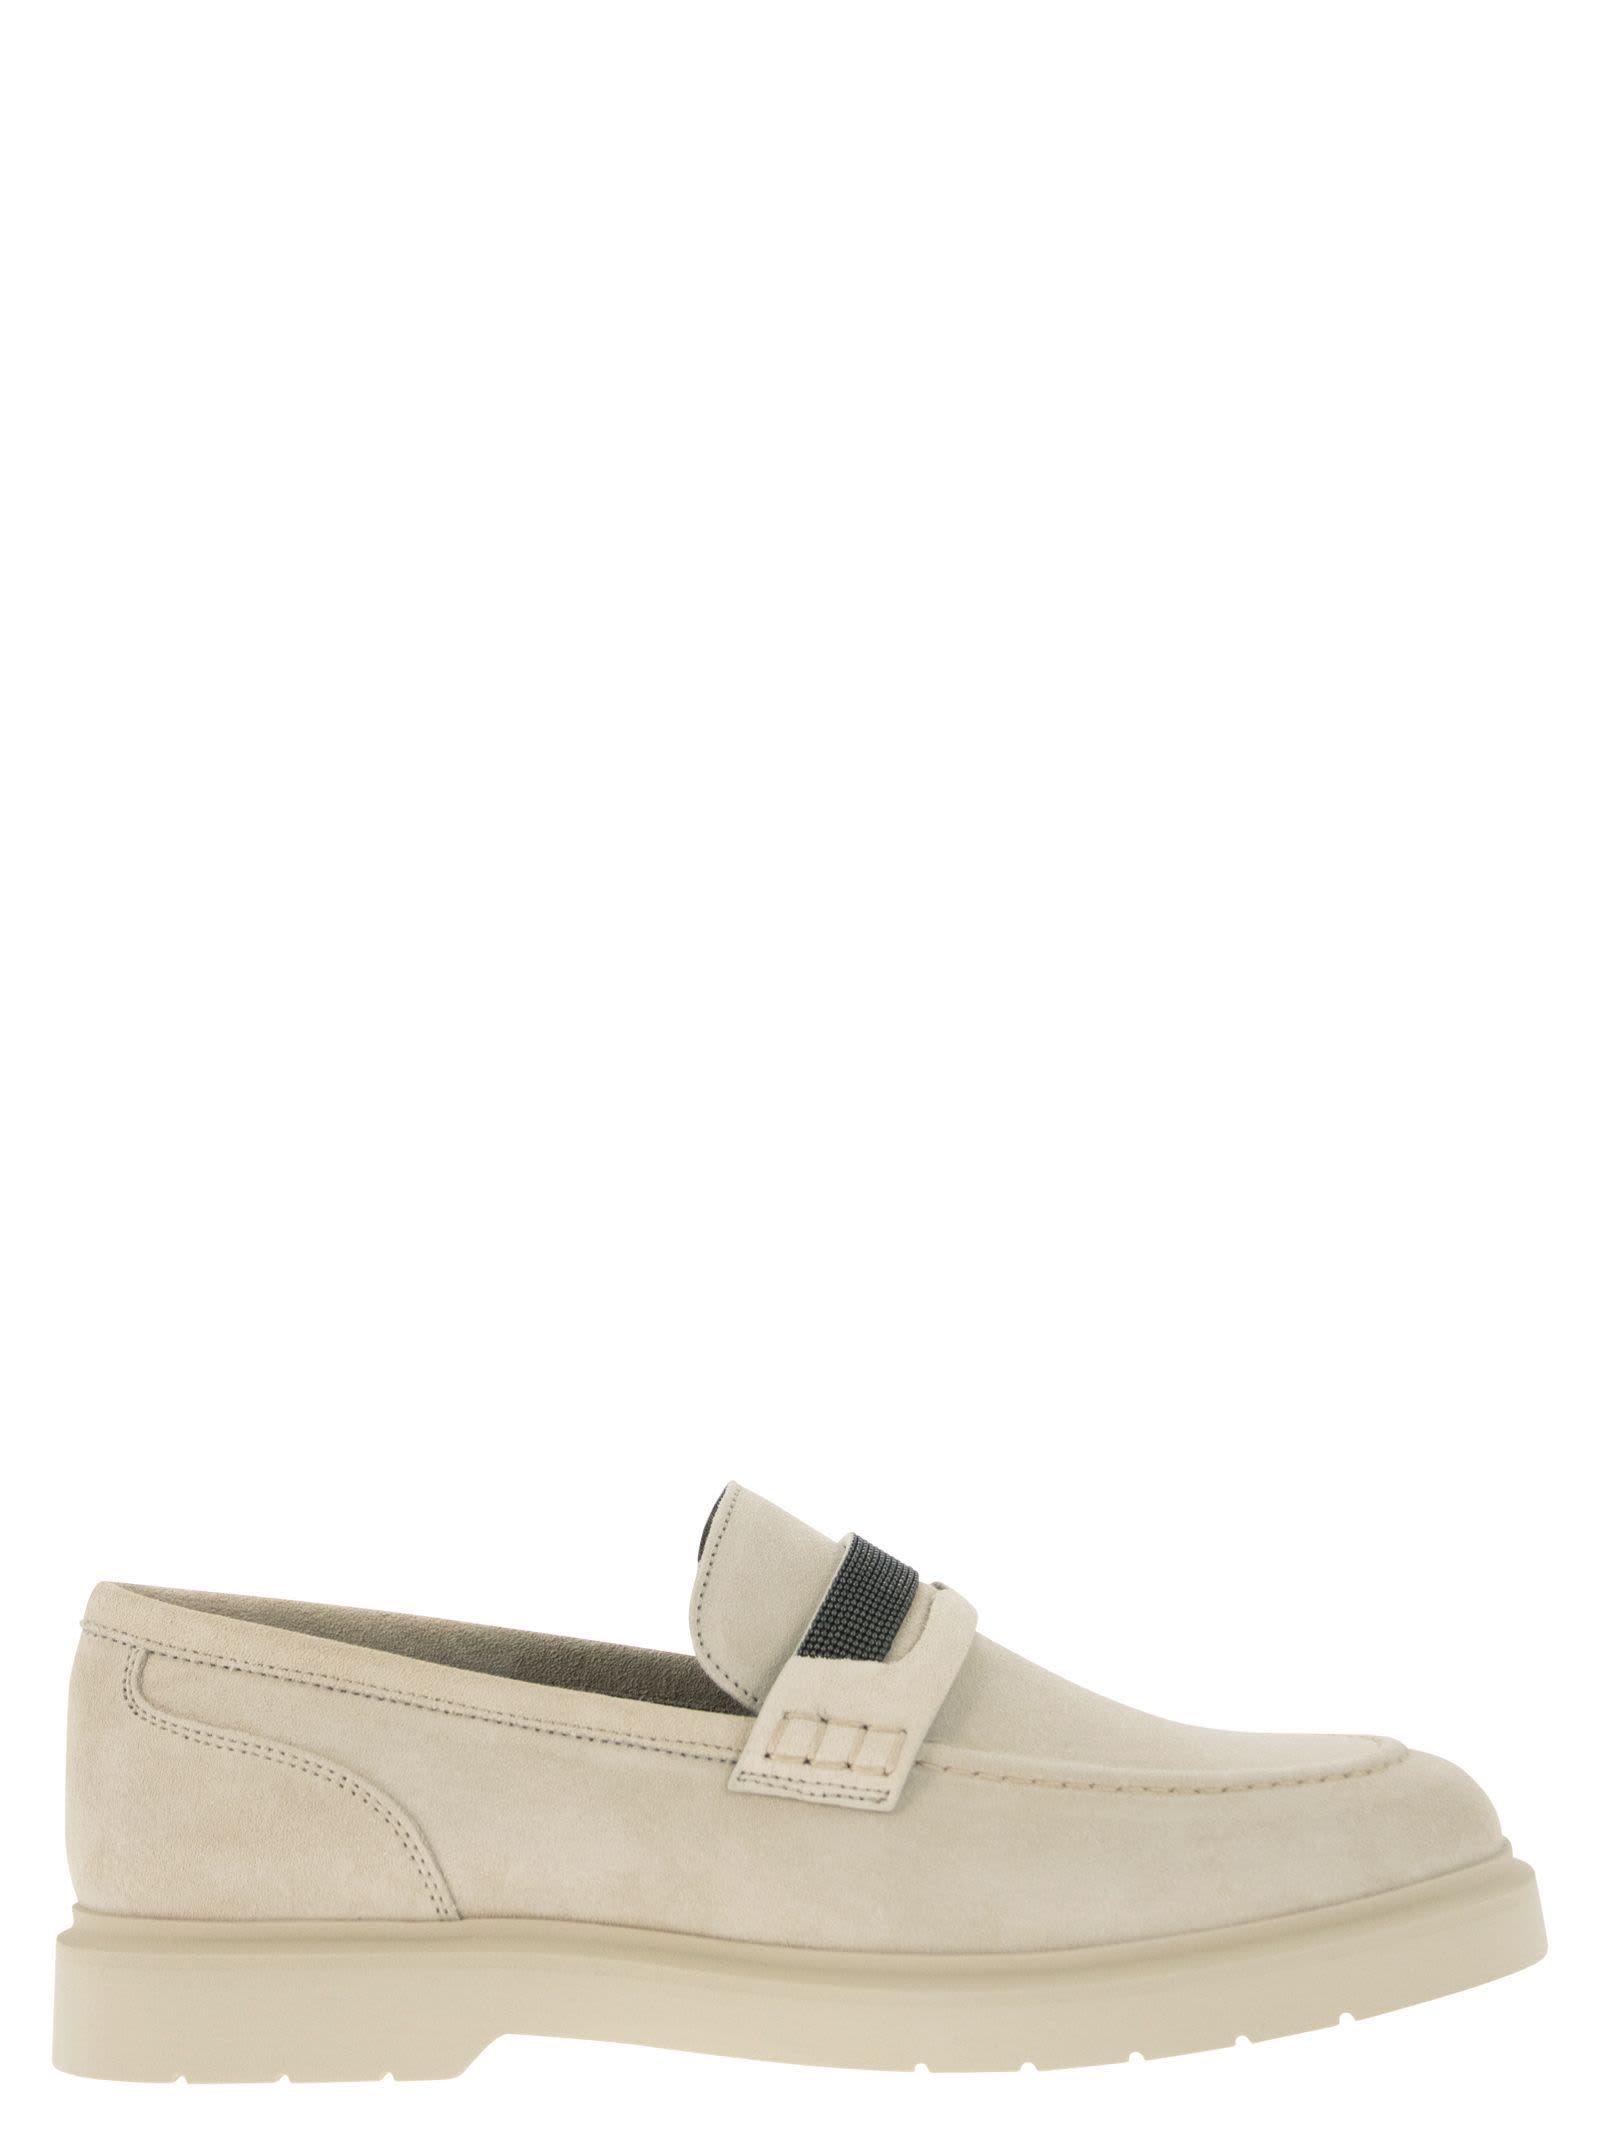 Brunello Cucinelli Suede Penny Loafer With Jewellery - Ivory - female - Size: 38.5